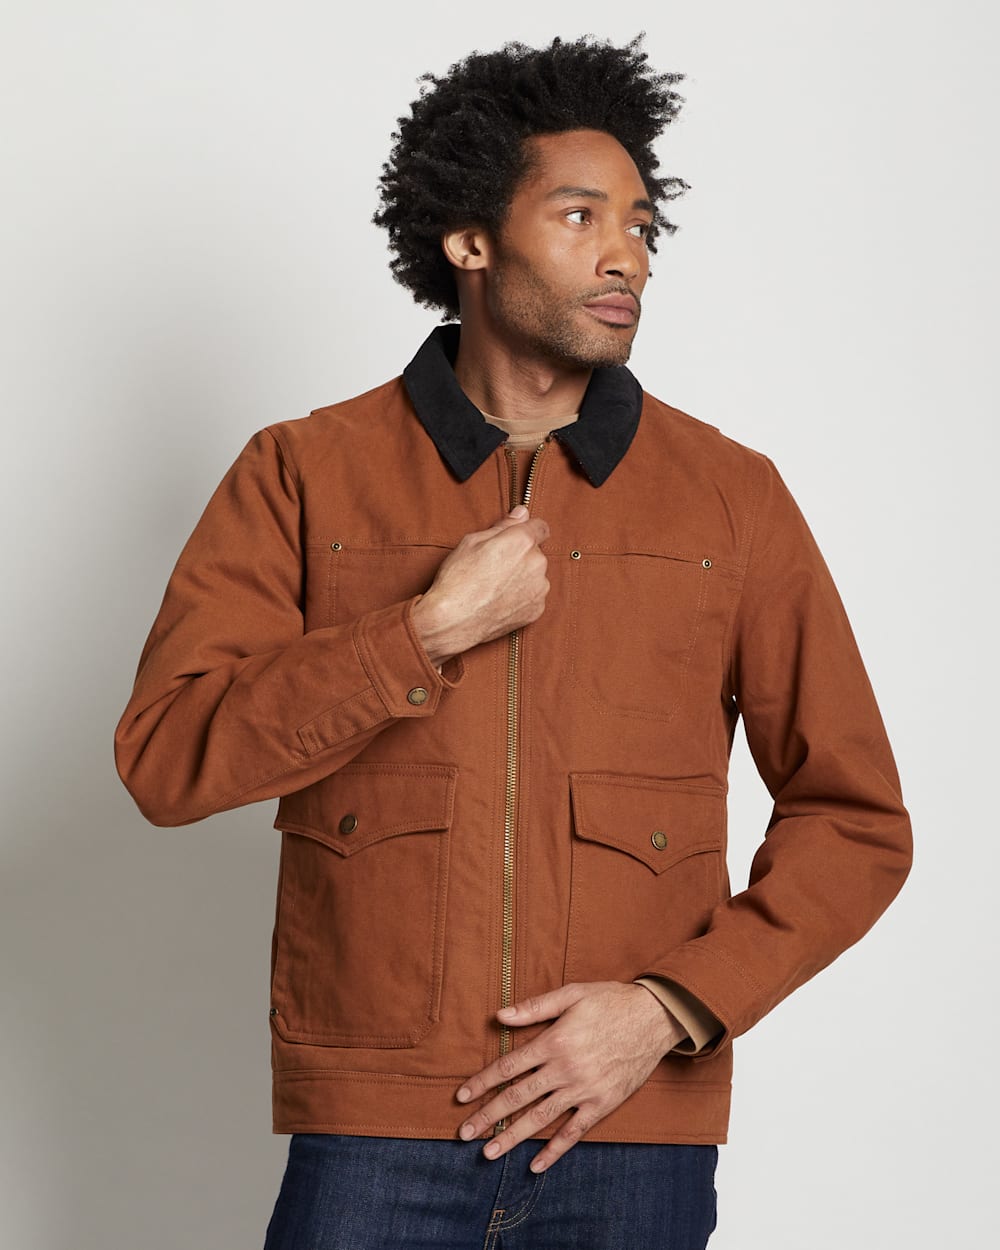 ALTERNATE VIEW OF MEN'S CARSON CITY CANVAS BARN COAT IN WHISKEY image number 6